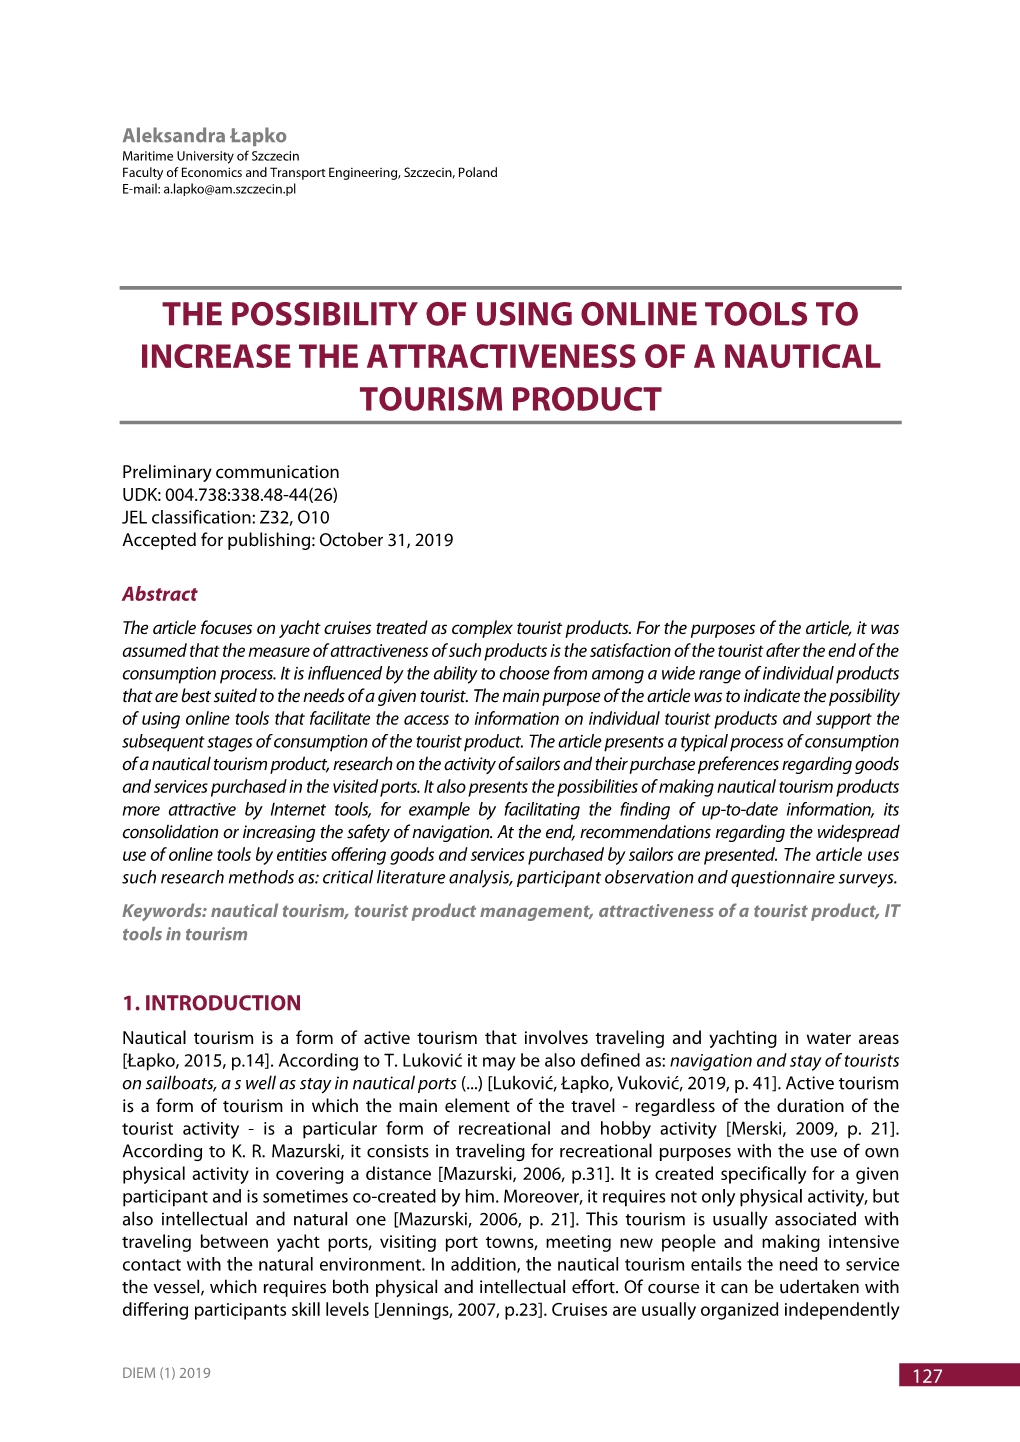 The Possibility of Using Online Tools to Increase the Attractiveness of a Nautical Tourism Product